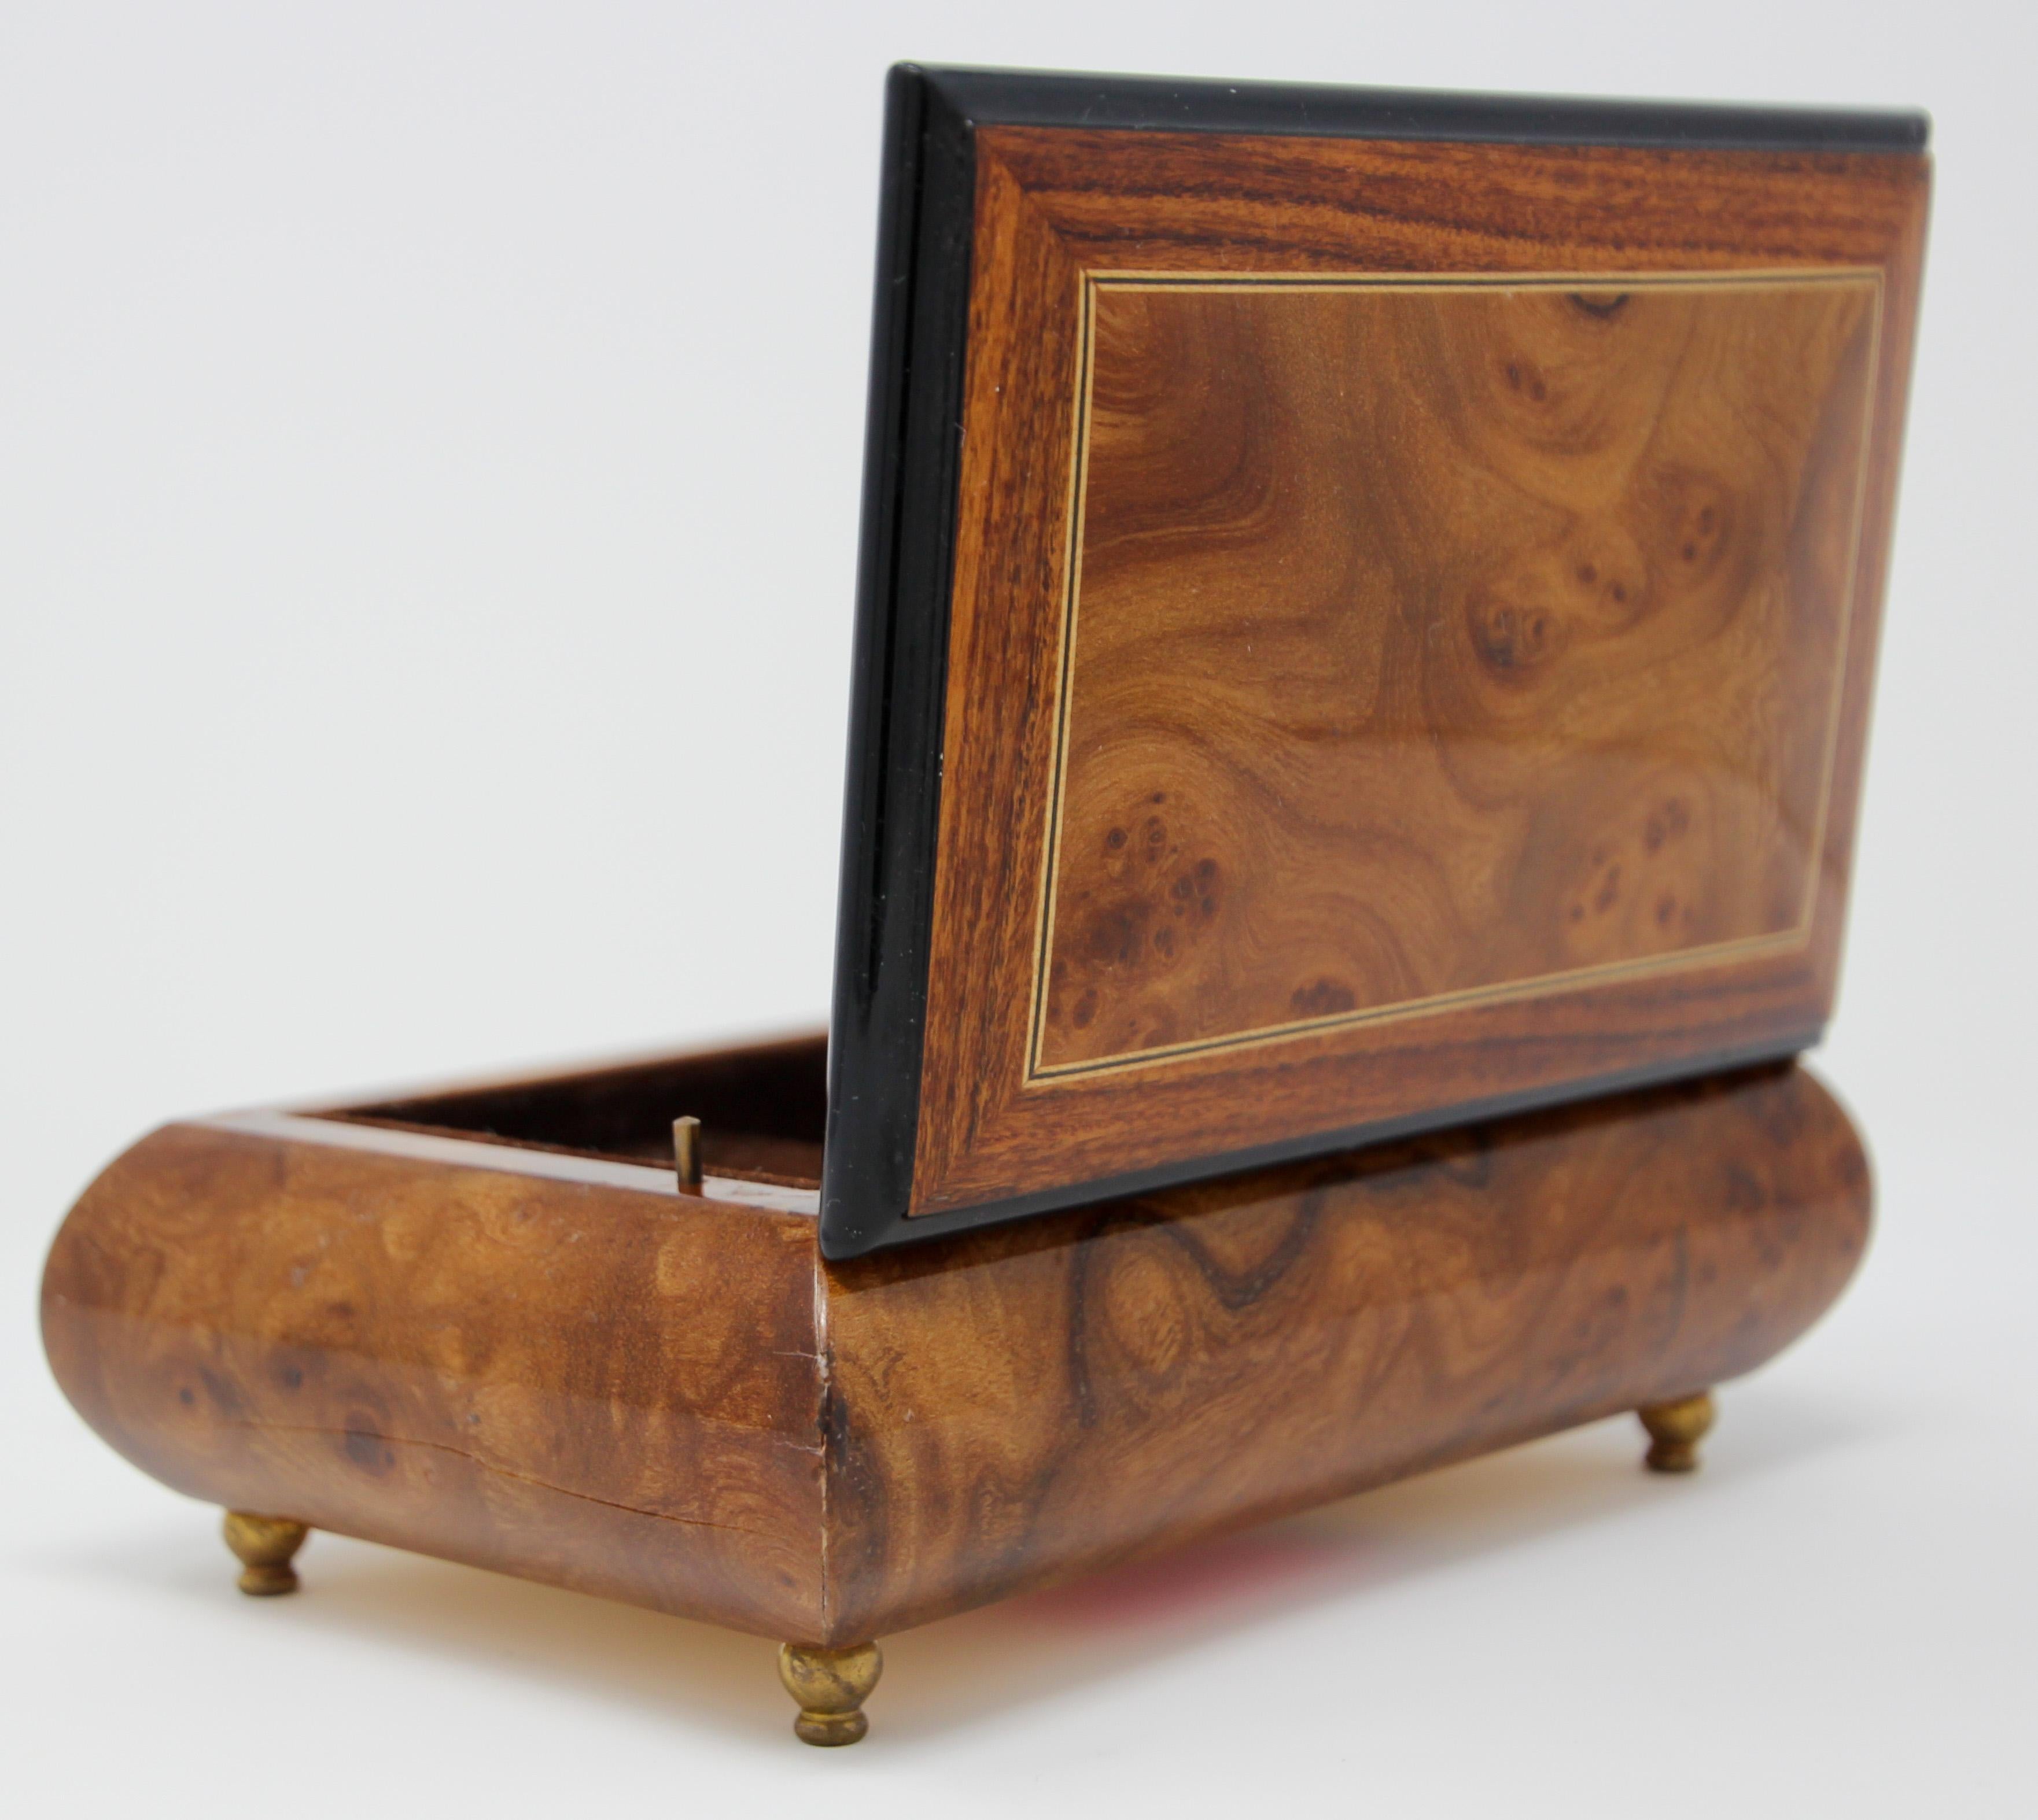 Italian Footed Wooden Jewelry Music Box Made in Italy